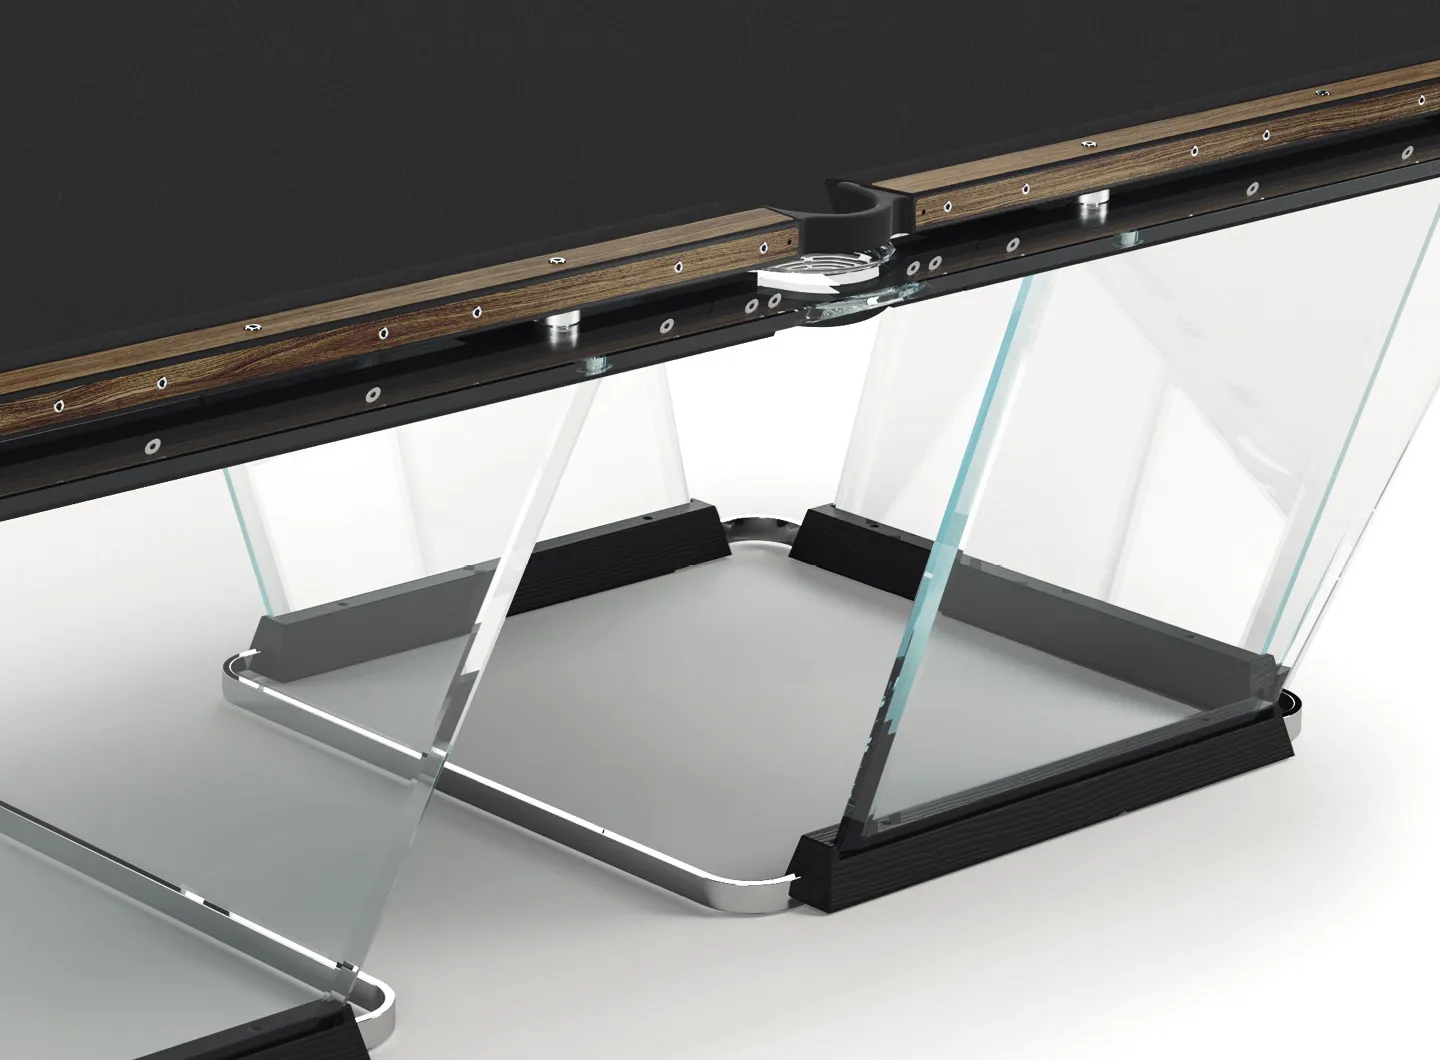 Table’s legs are made of clear tempered glass.